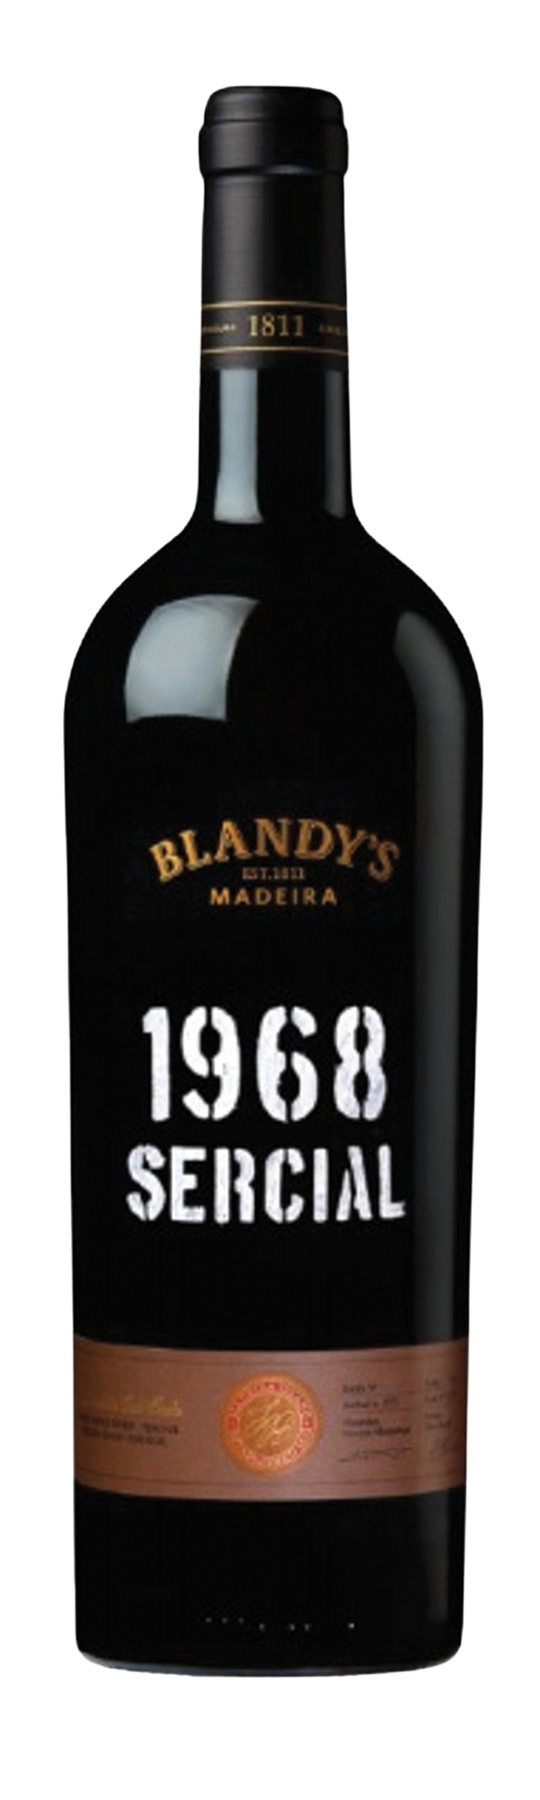 Blandy's Sercial 5 Years Old 20% 75cl